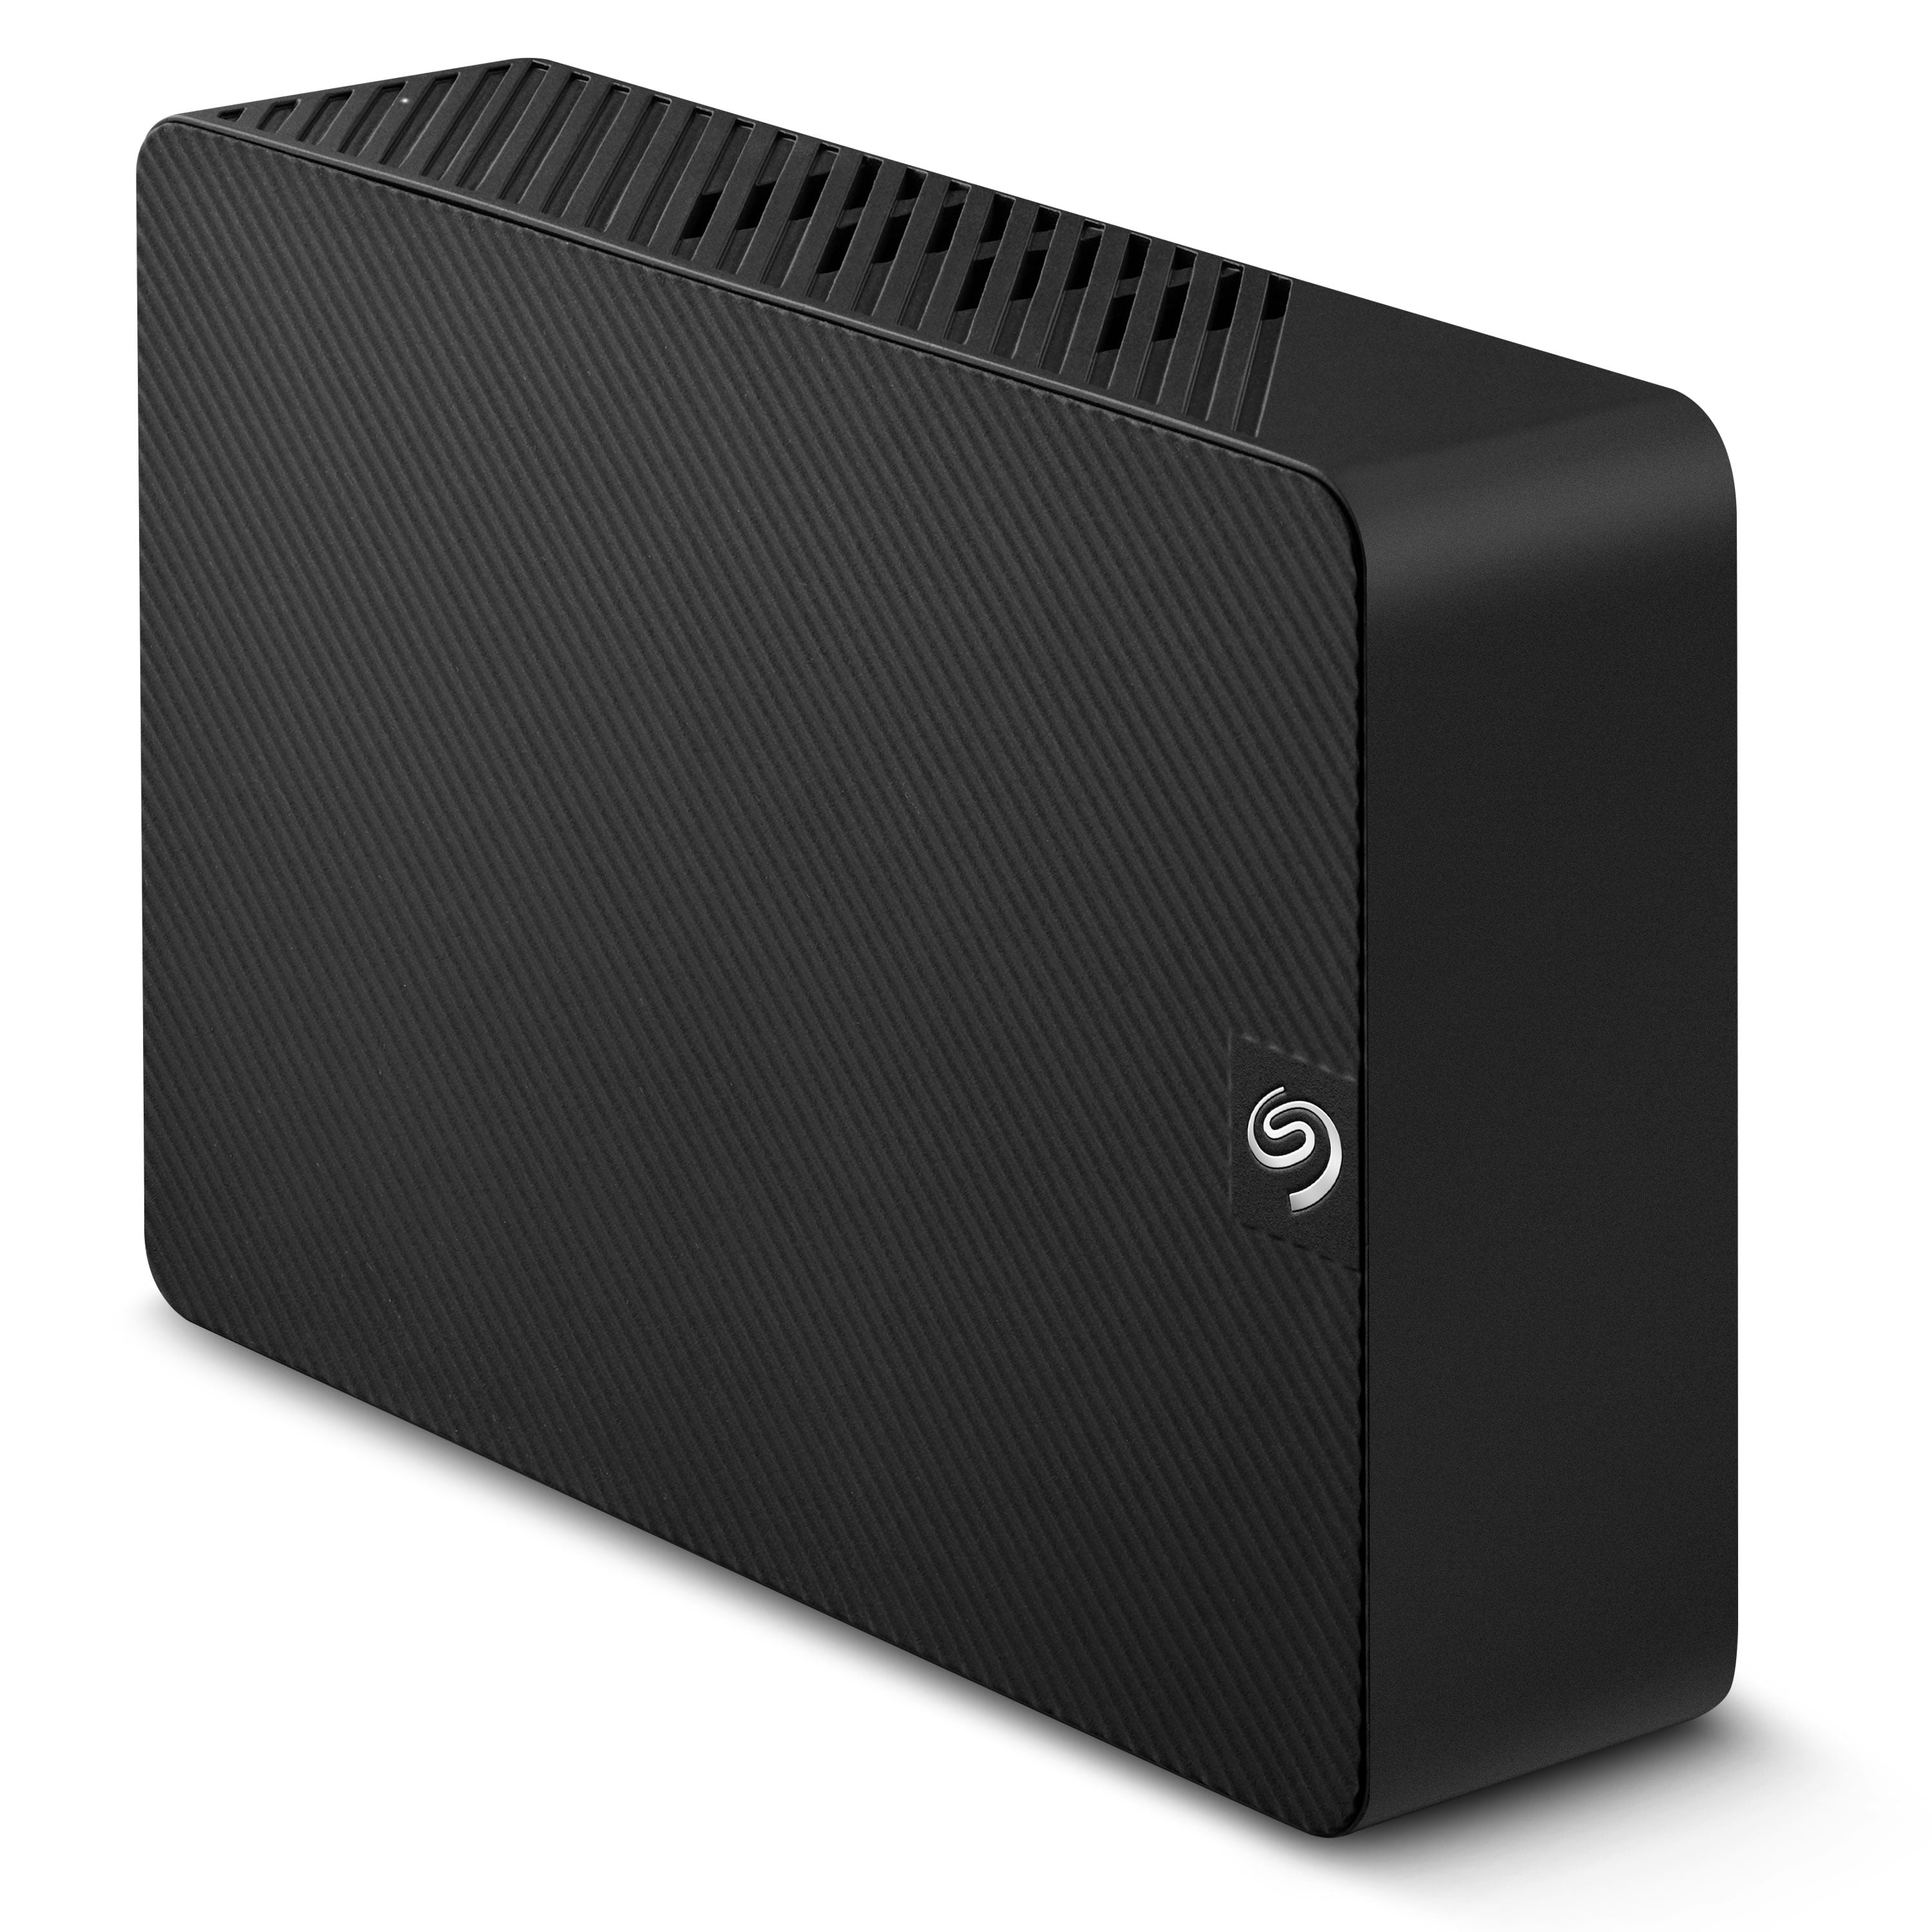 Seagate ExpansionPLUS 4TB External Hard Drive HDD - USB 3.0 Rescue Data Recovery Services and Toolkit Backup Software (STKR4000400) - Walmart.com